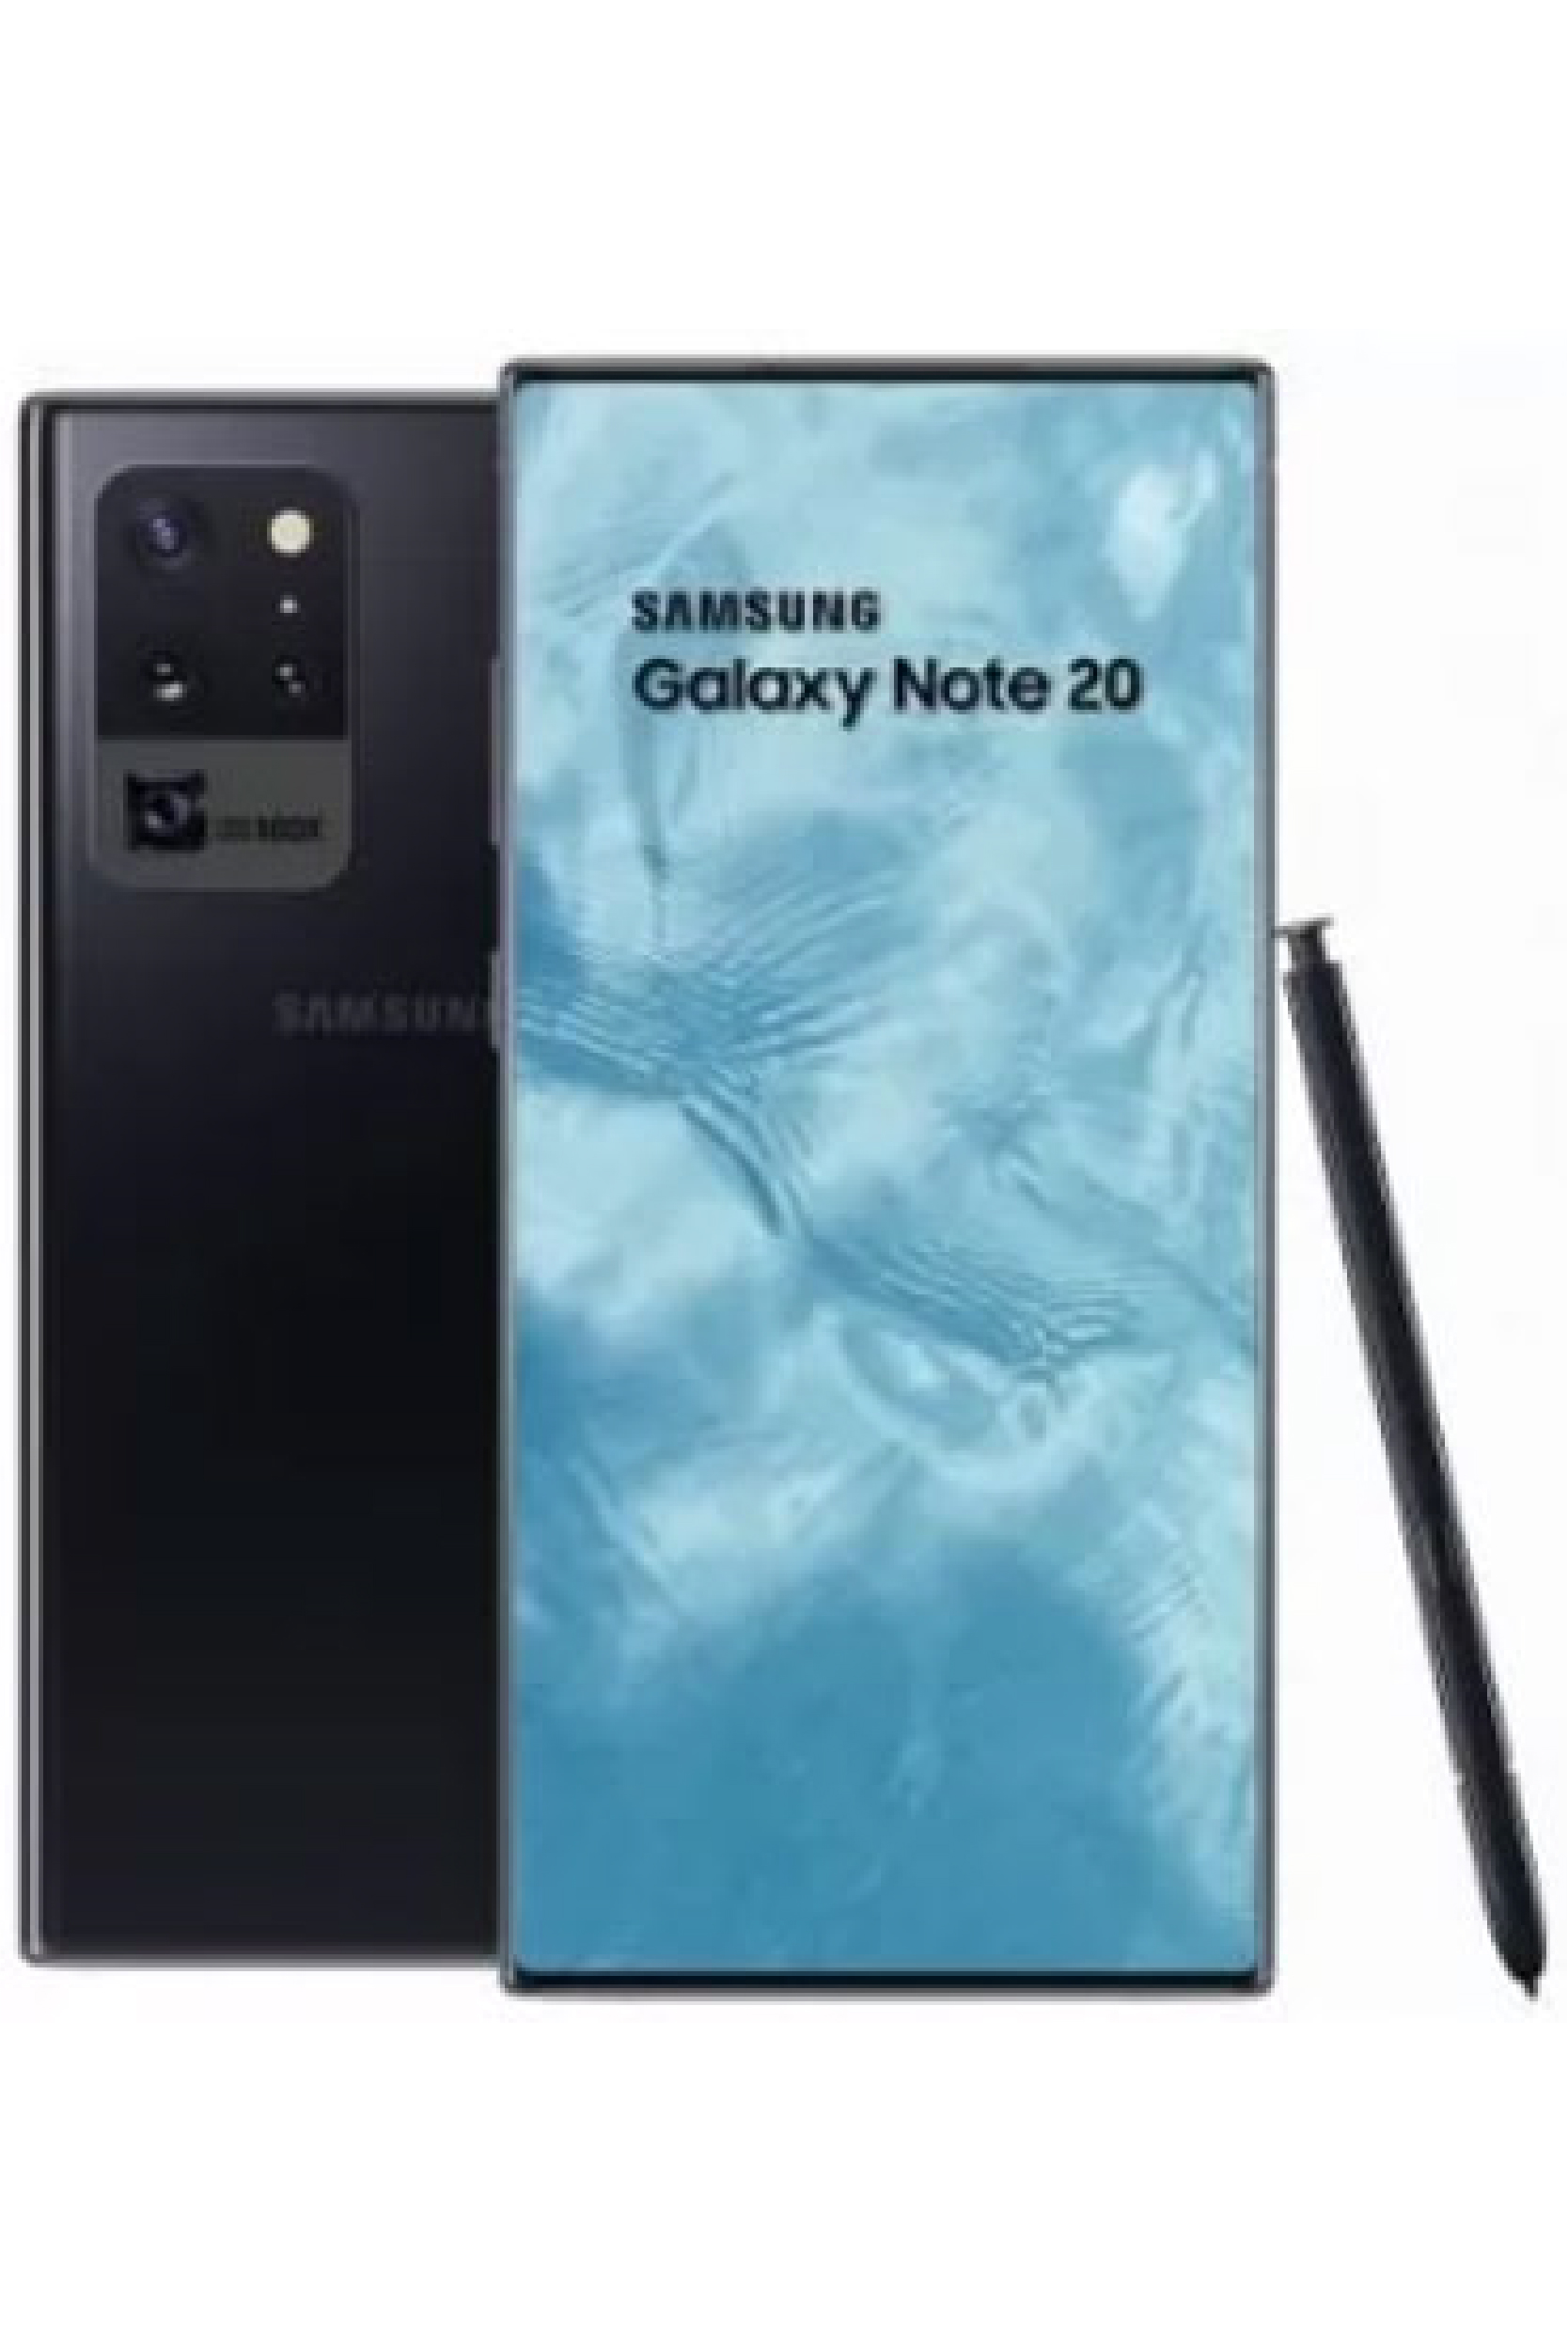 Samsung Galaxy Note 20 Ultra Price In Pakistan And Specs Propakistani